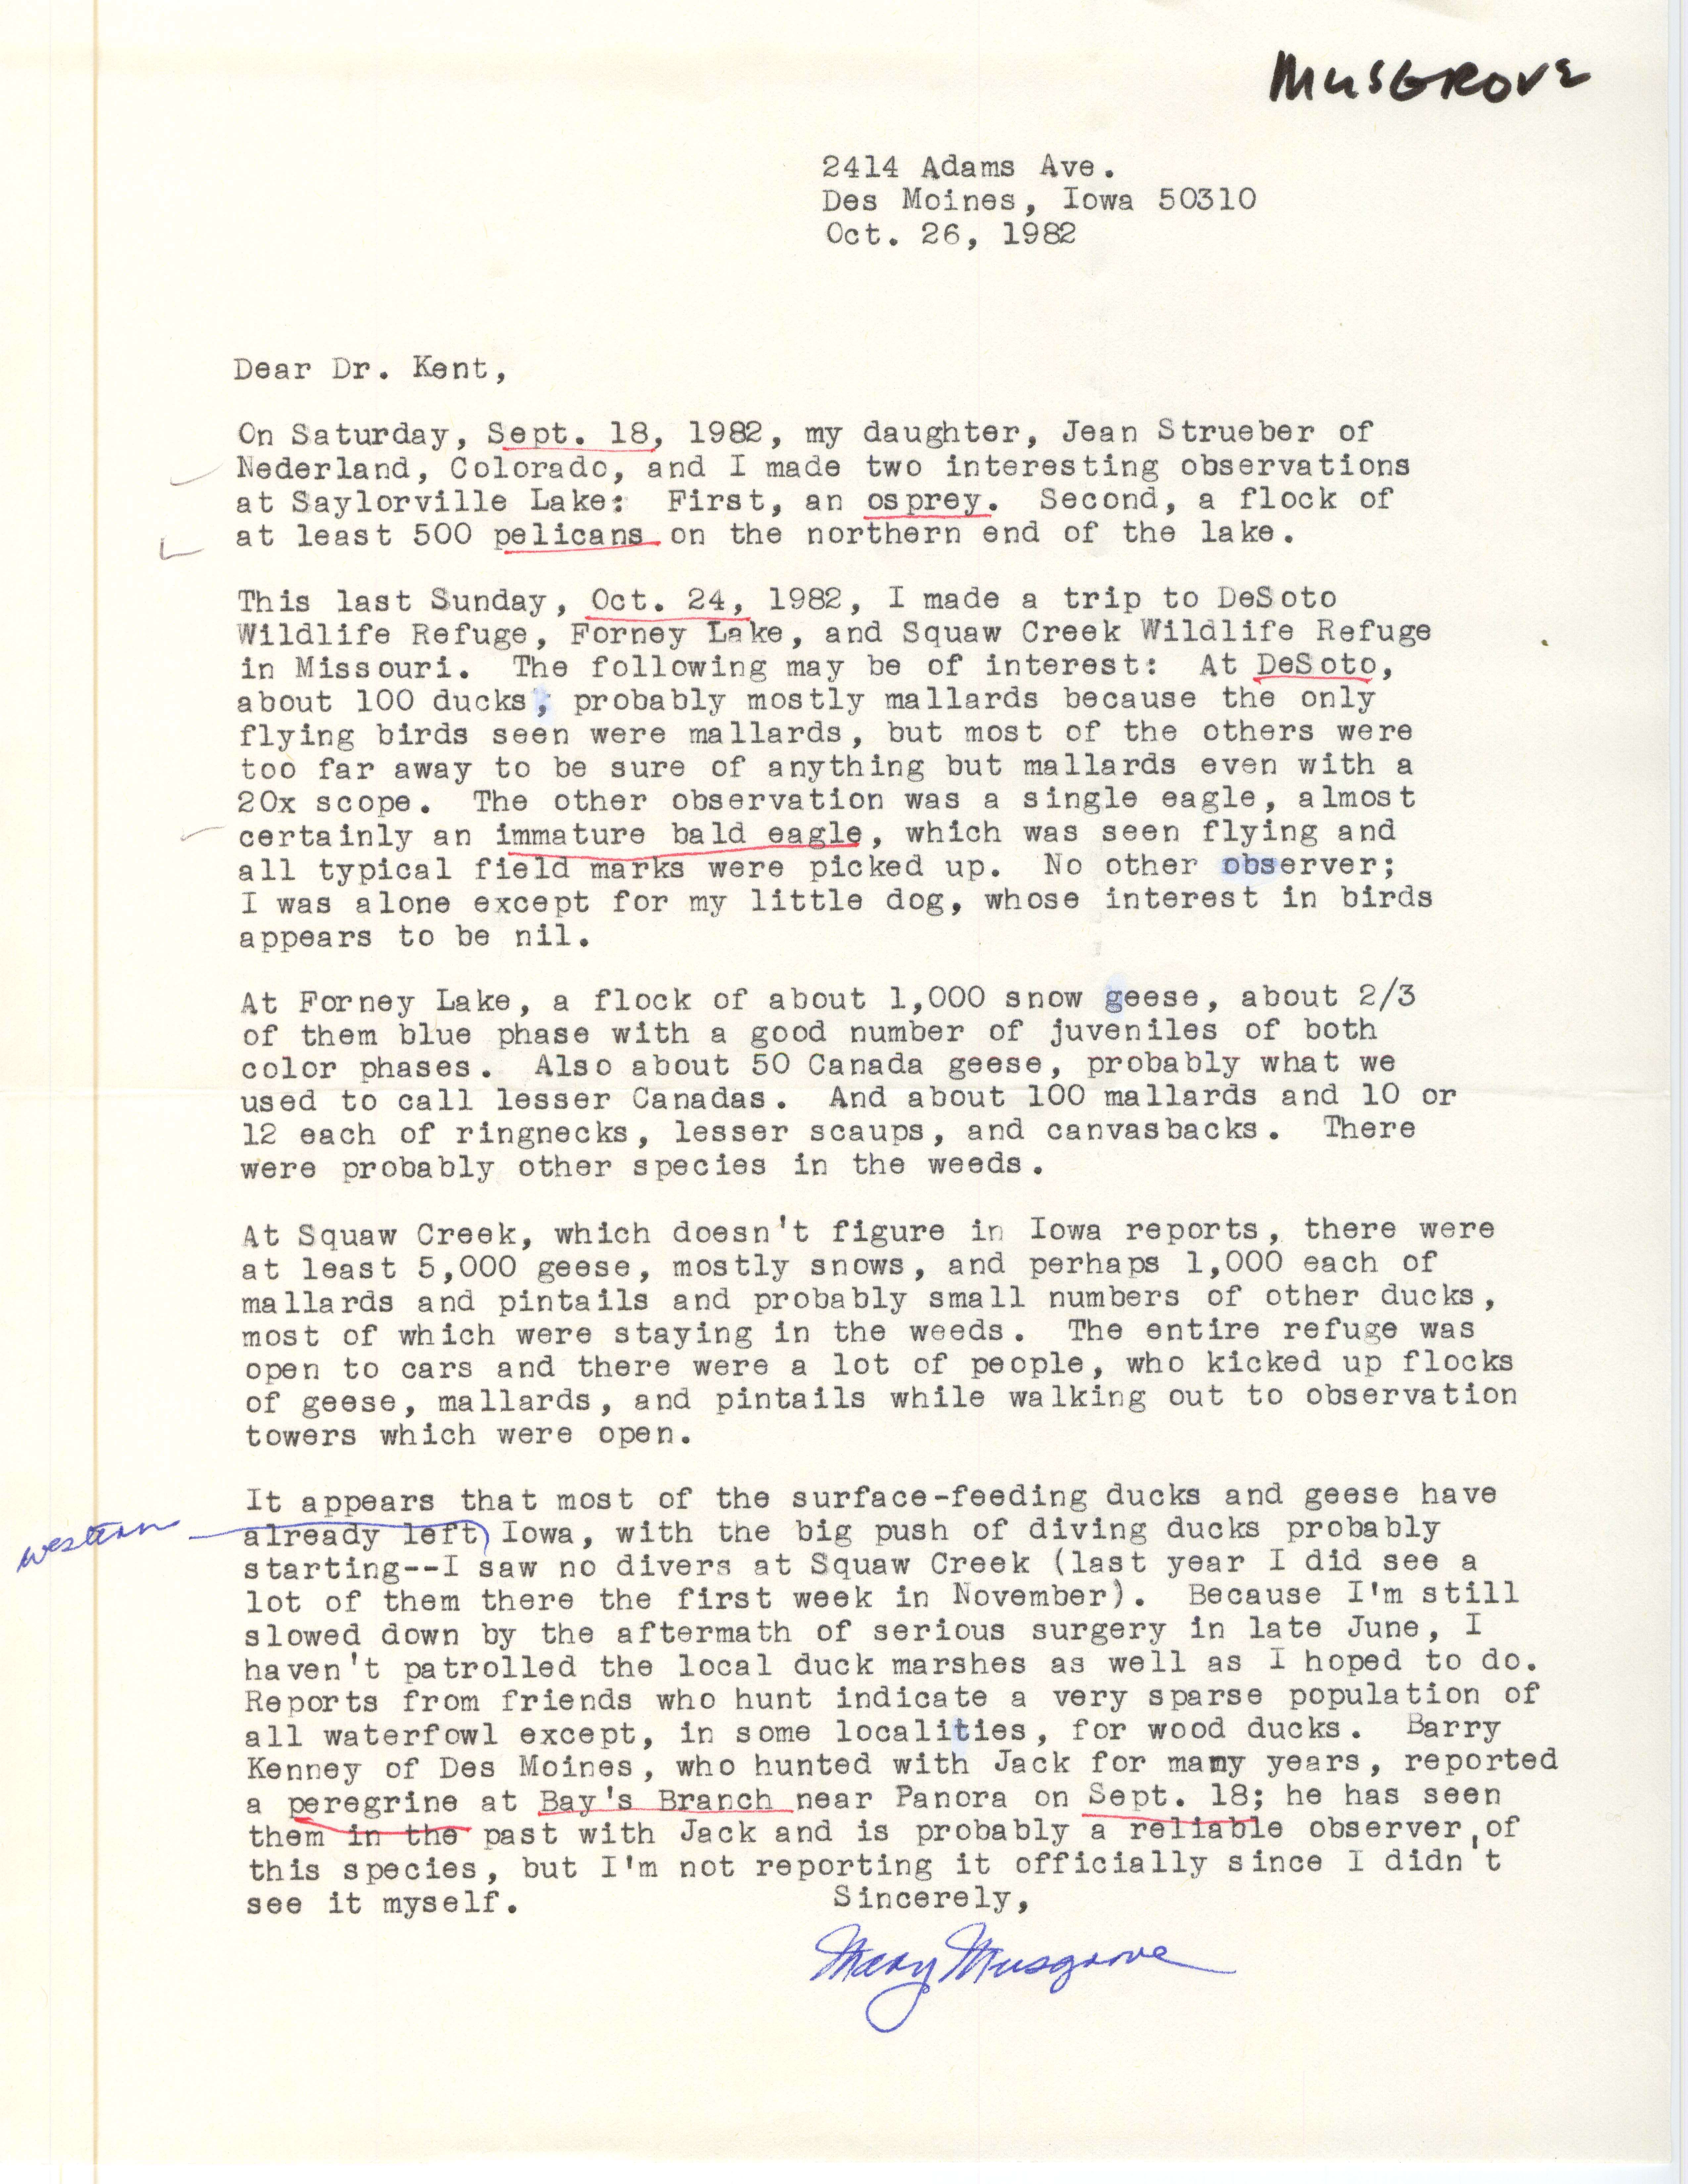 Mary R. Musgrove letter to Thomas H. Kent regarding field notes, October 26, 1982